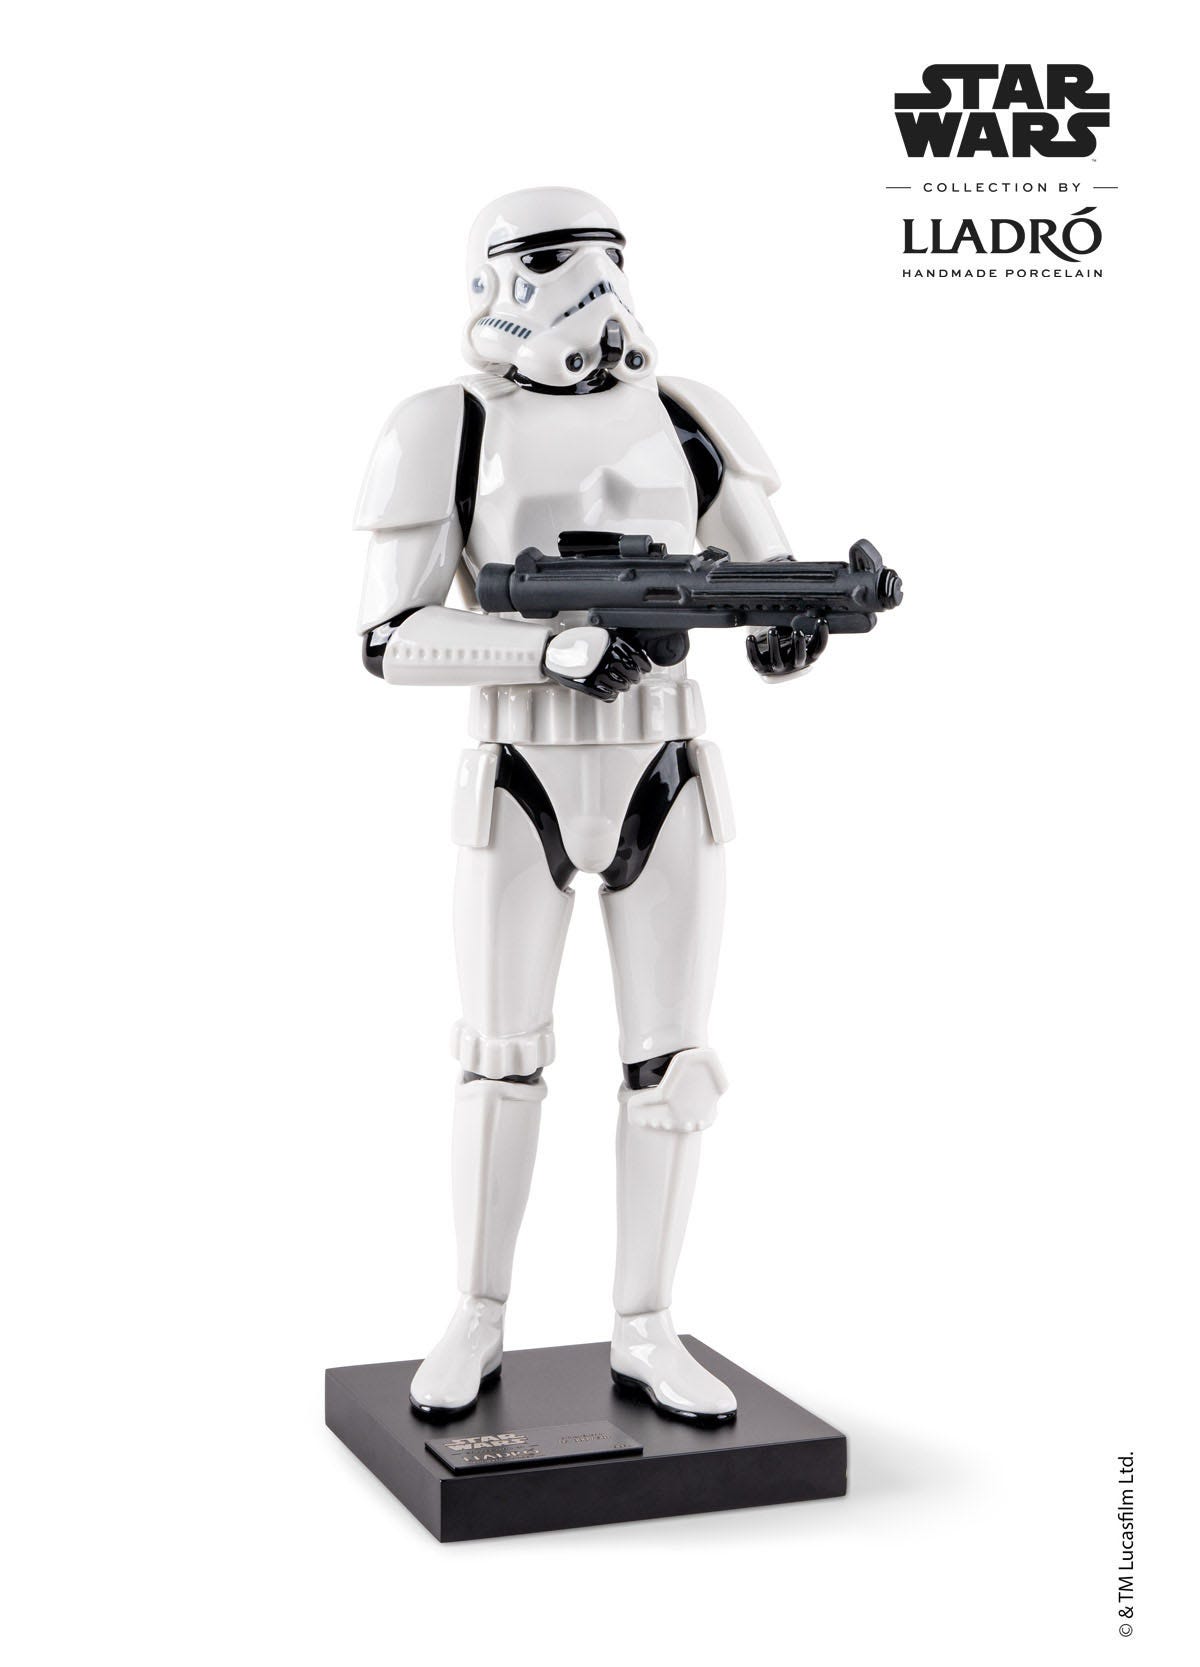 Stormtrooper™ Sculpture. Limited Edition